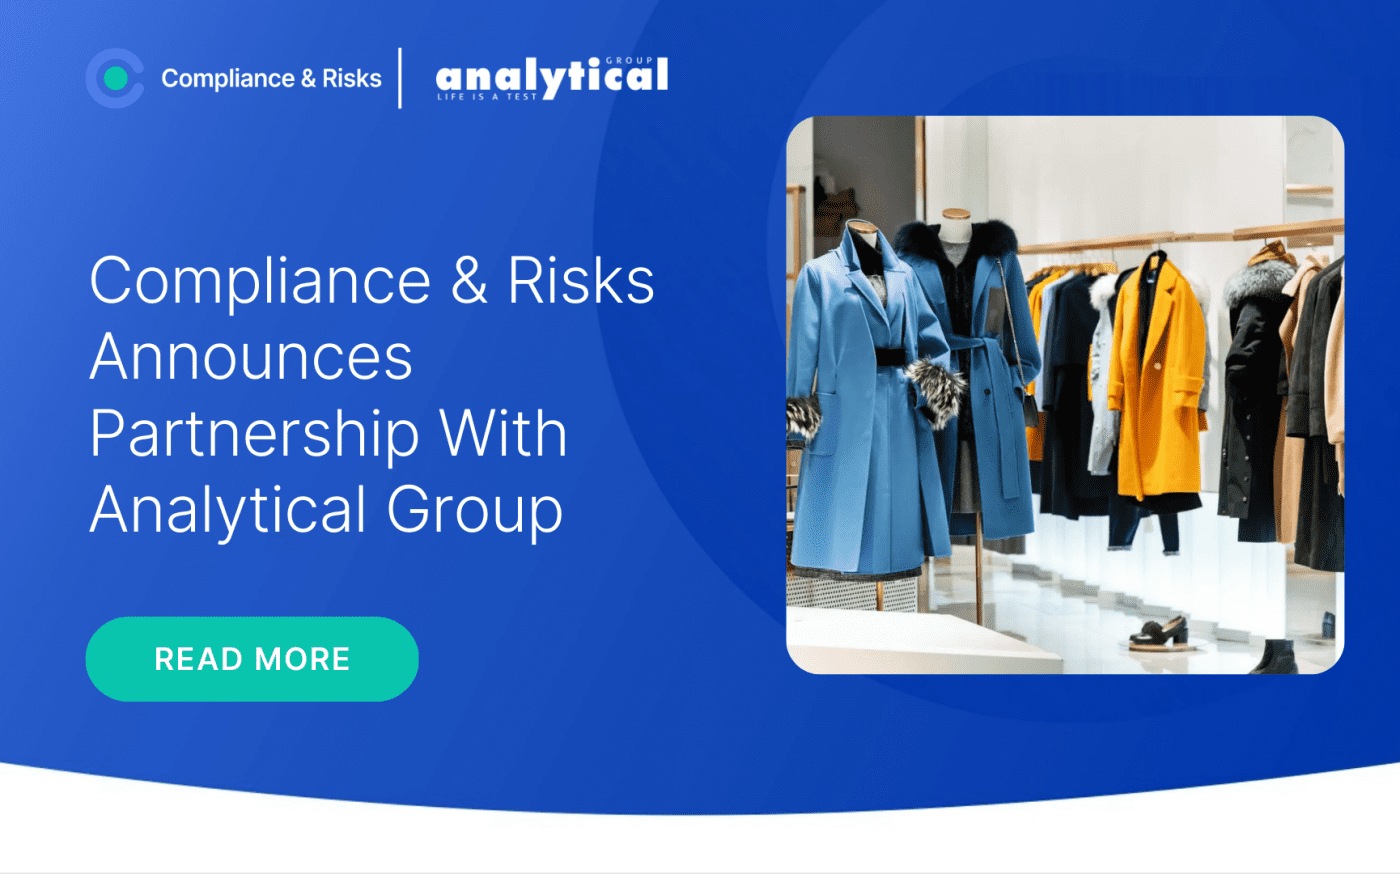 Compliance & Risks Partner With Analytical Group